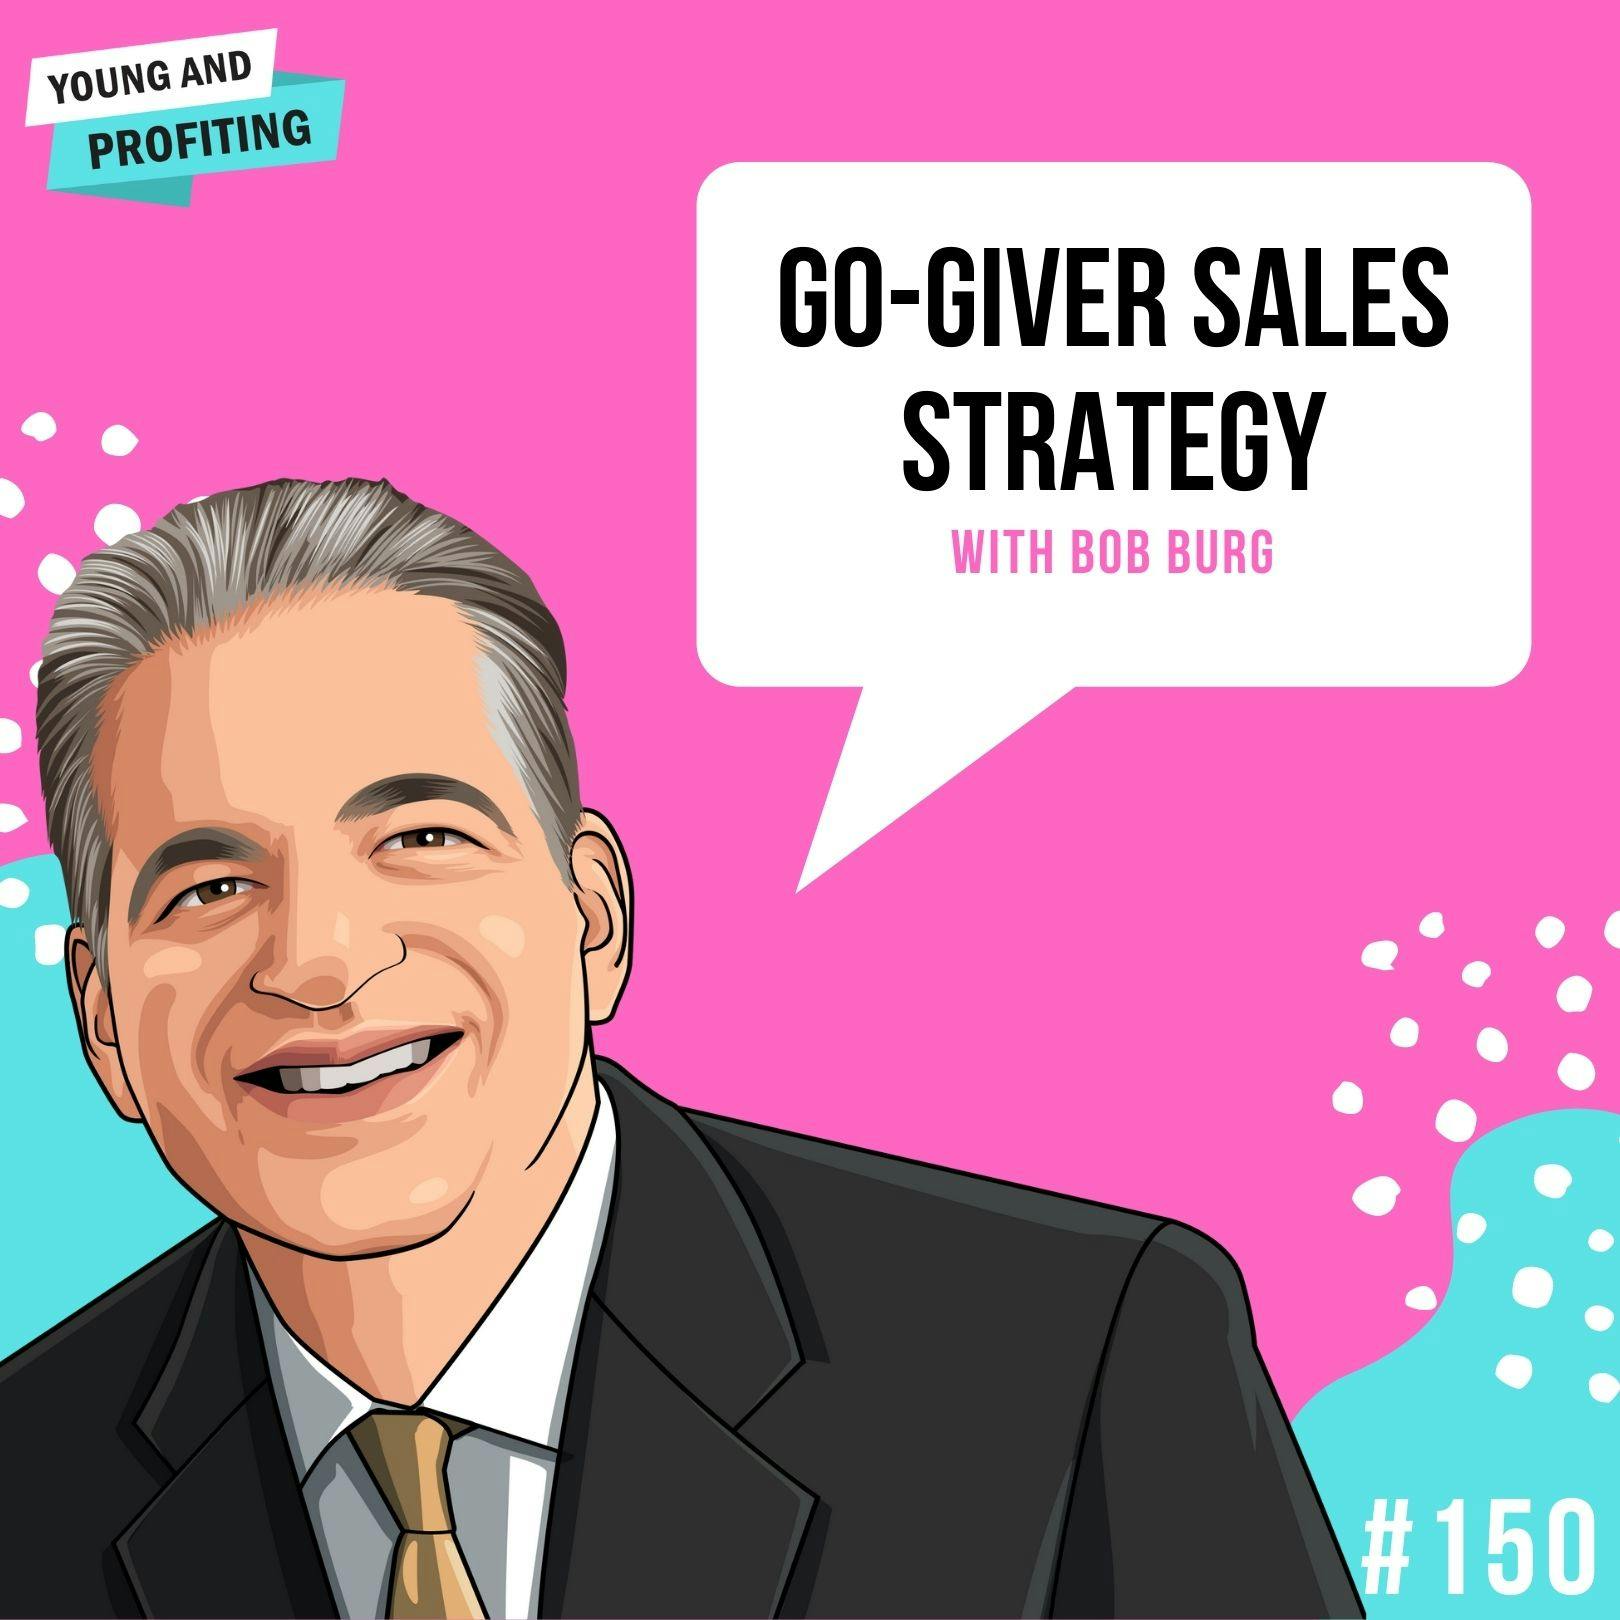 #150: Go-Giver Sales Strategy with Bob Burg